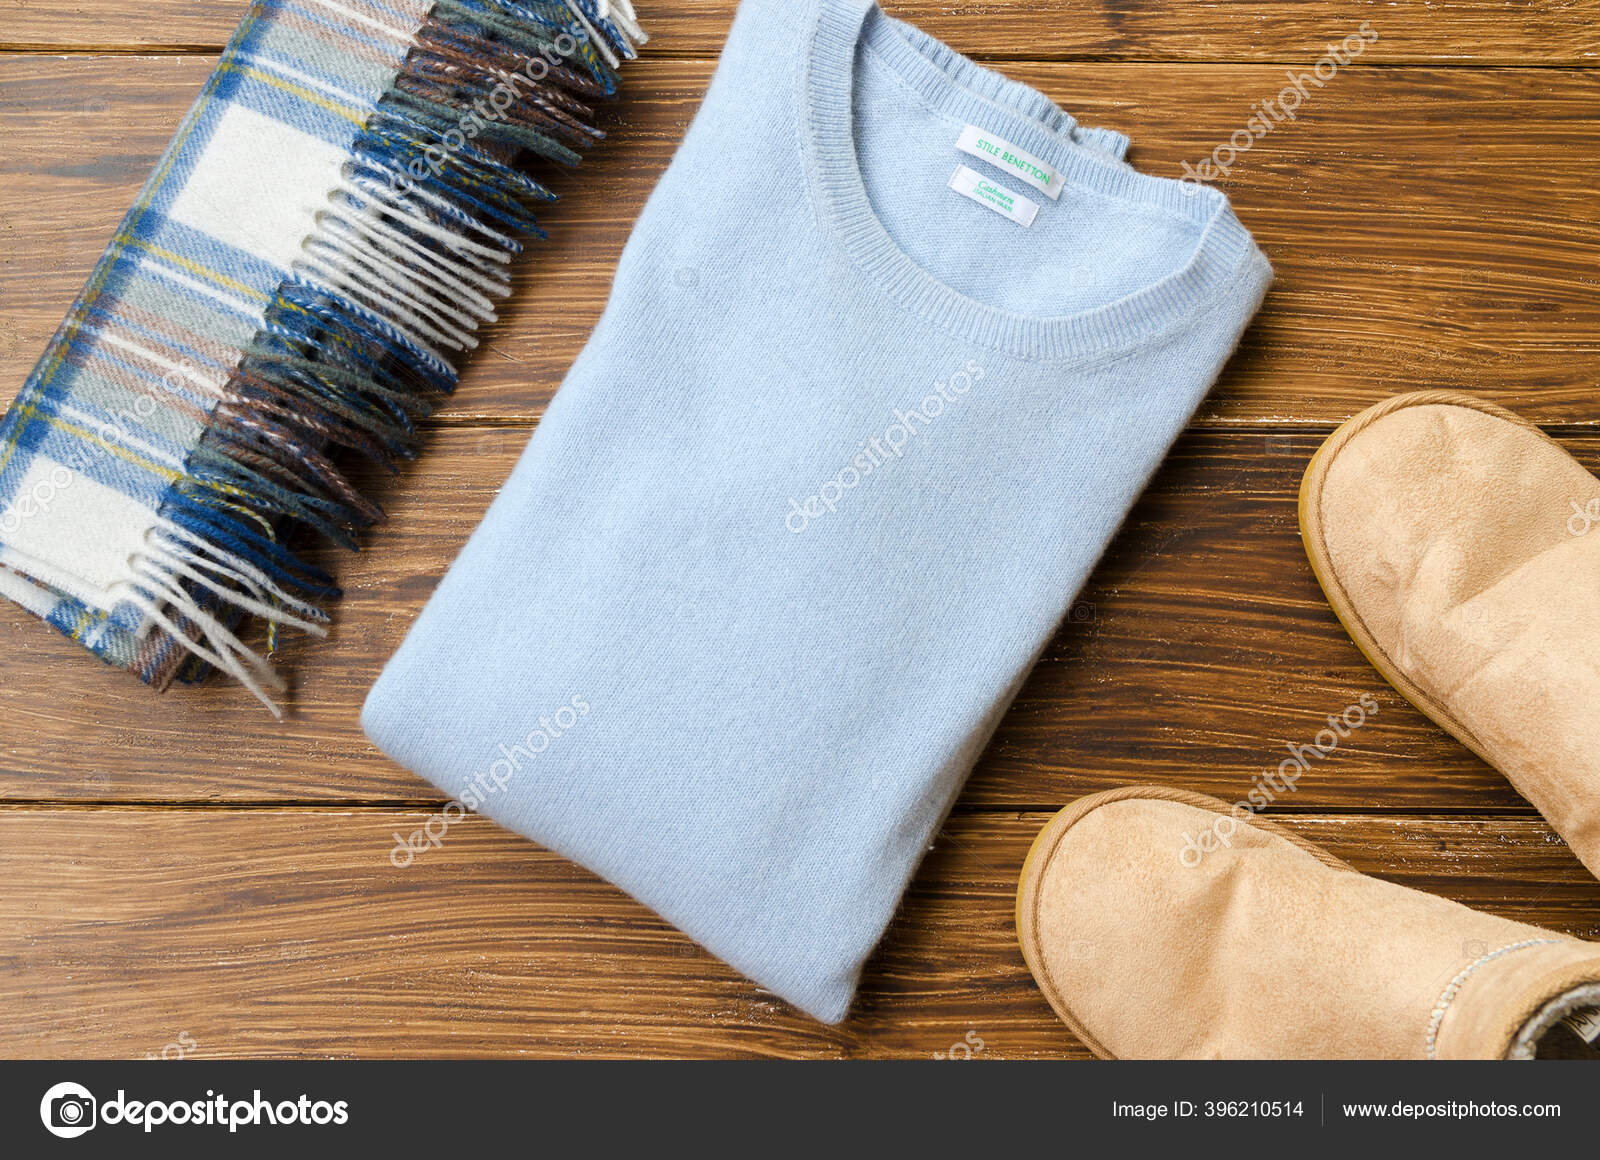 uggs cashmere sweater